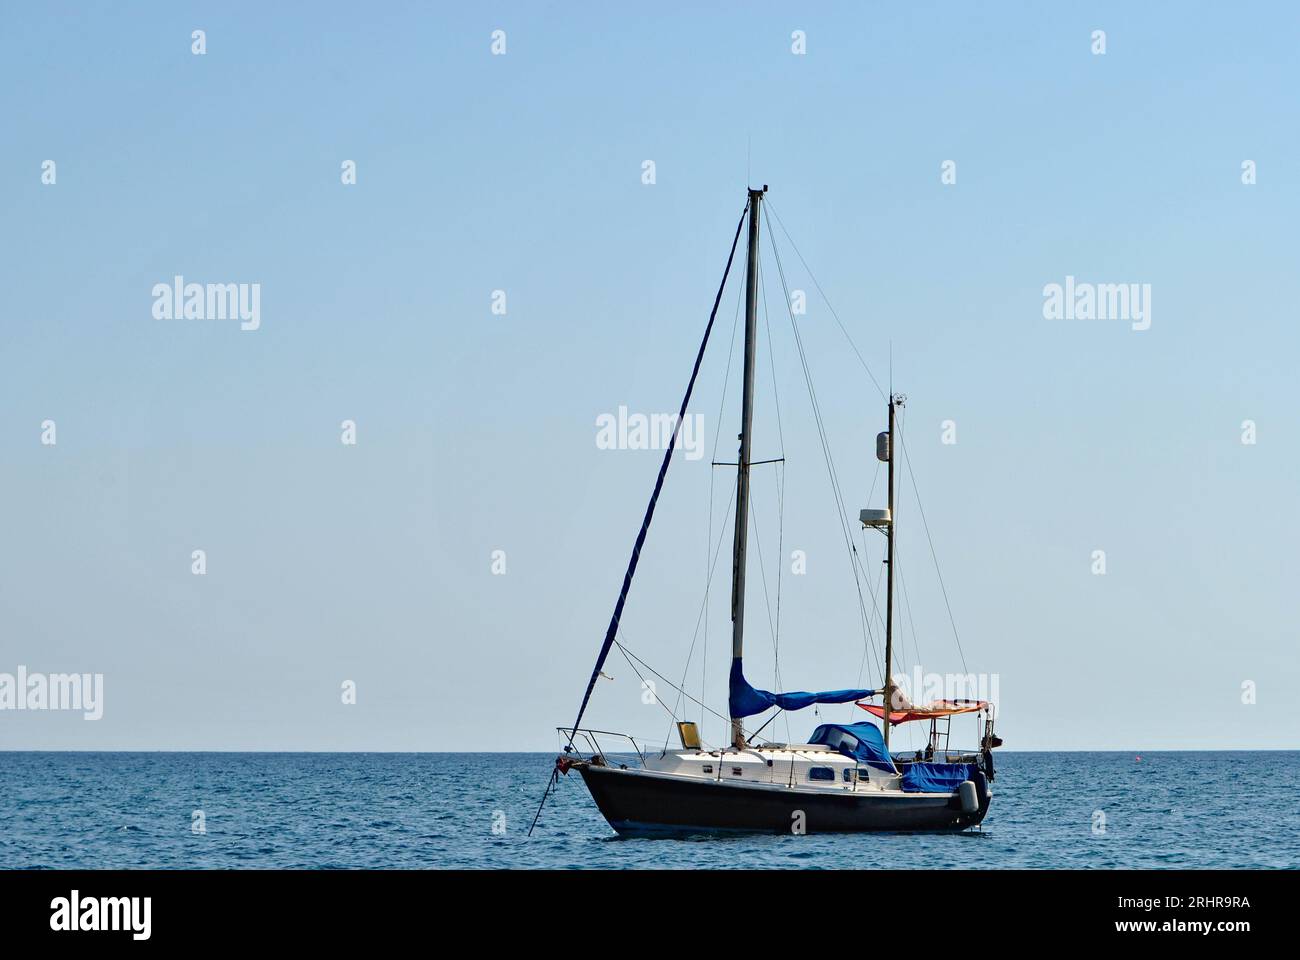 Sail boat on the horizon of the sea. Blurred blue background.  Negative space for text. Vacation on Santorini islands, Greece. Stock Photo